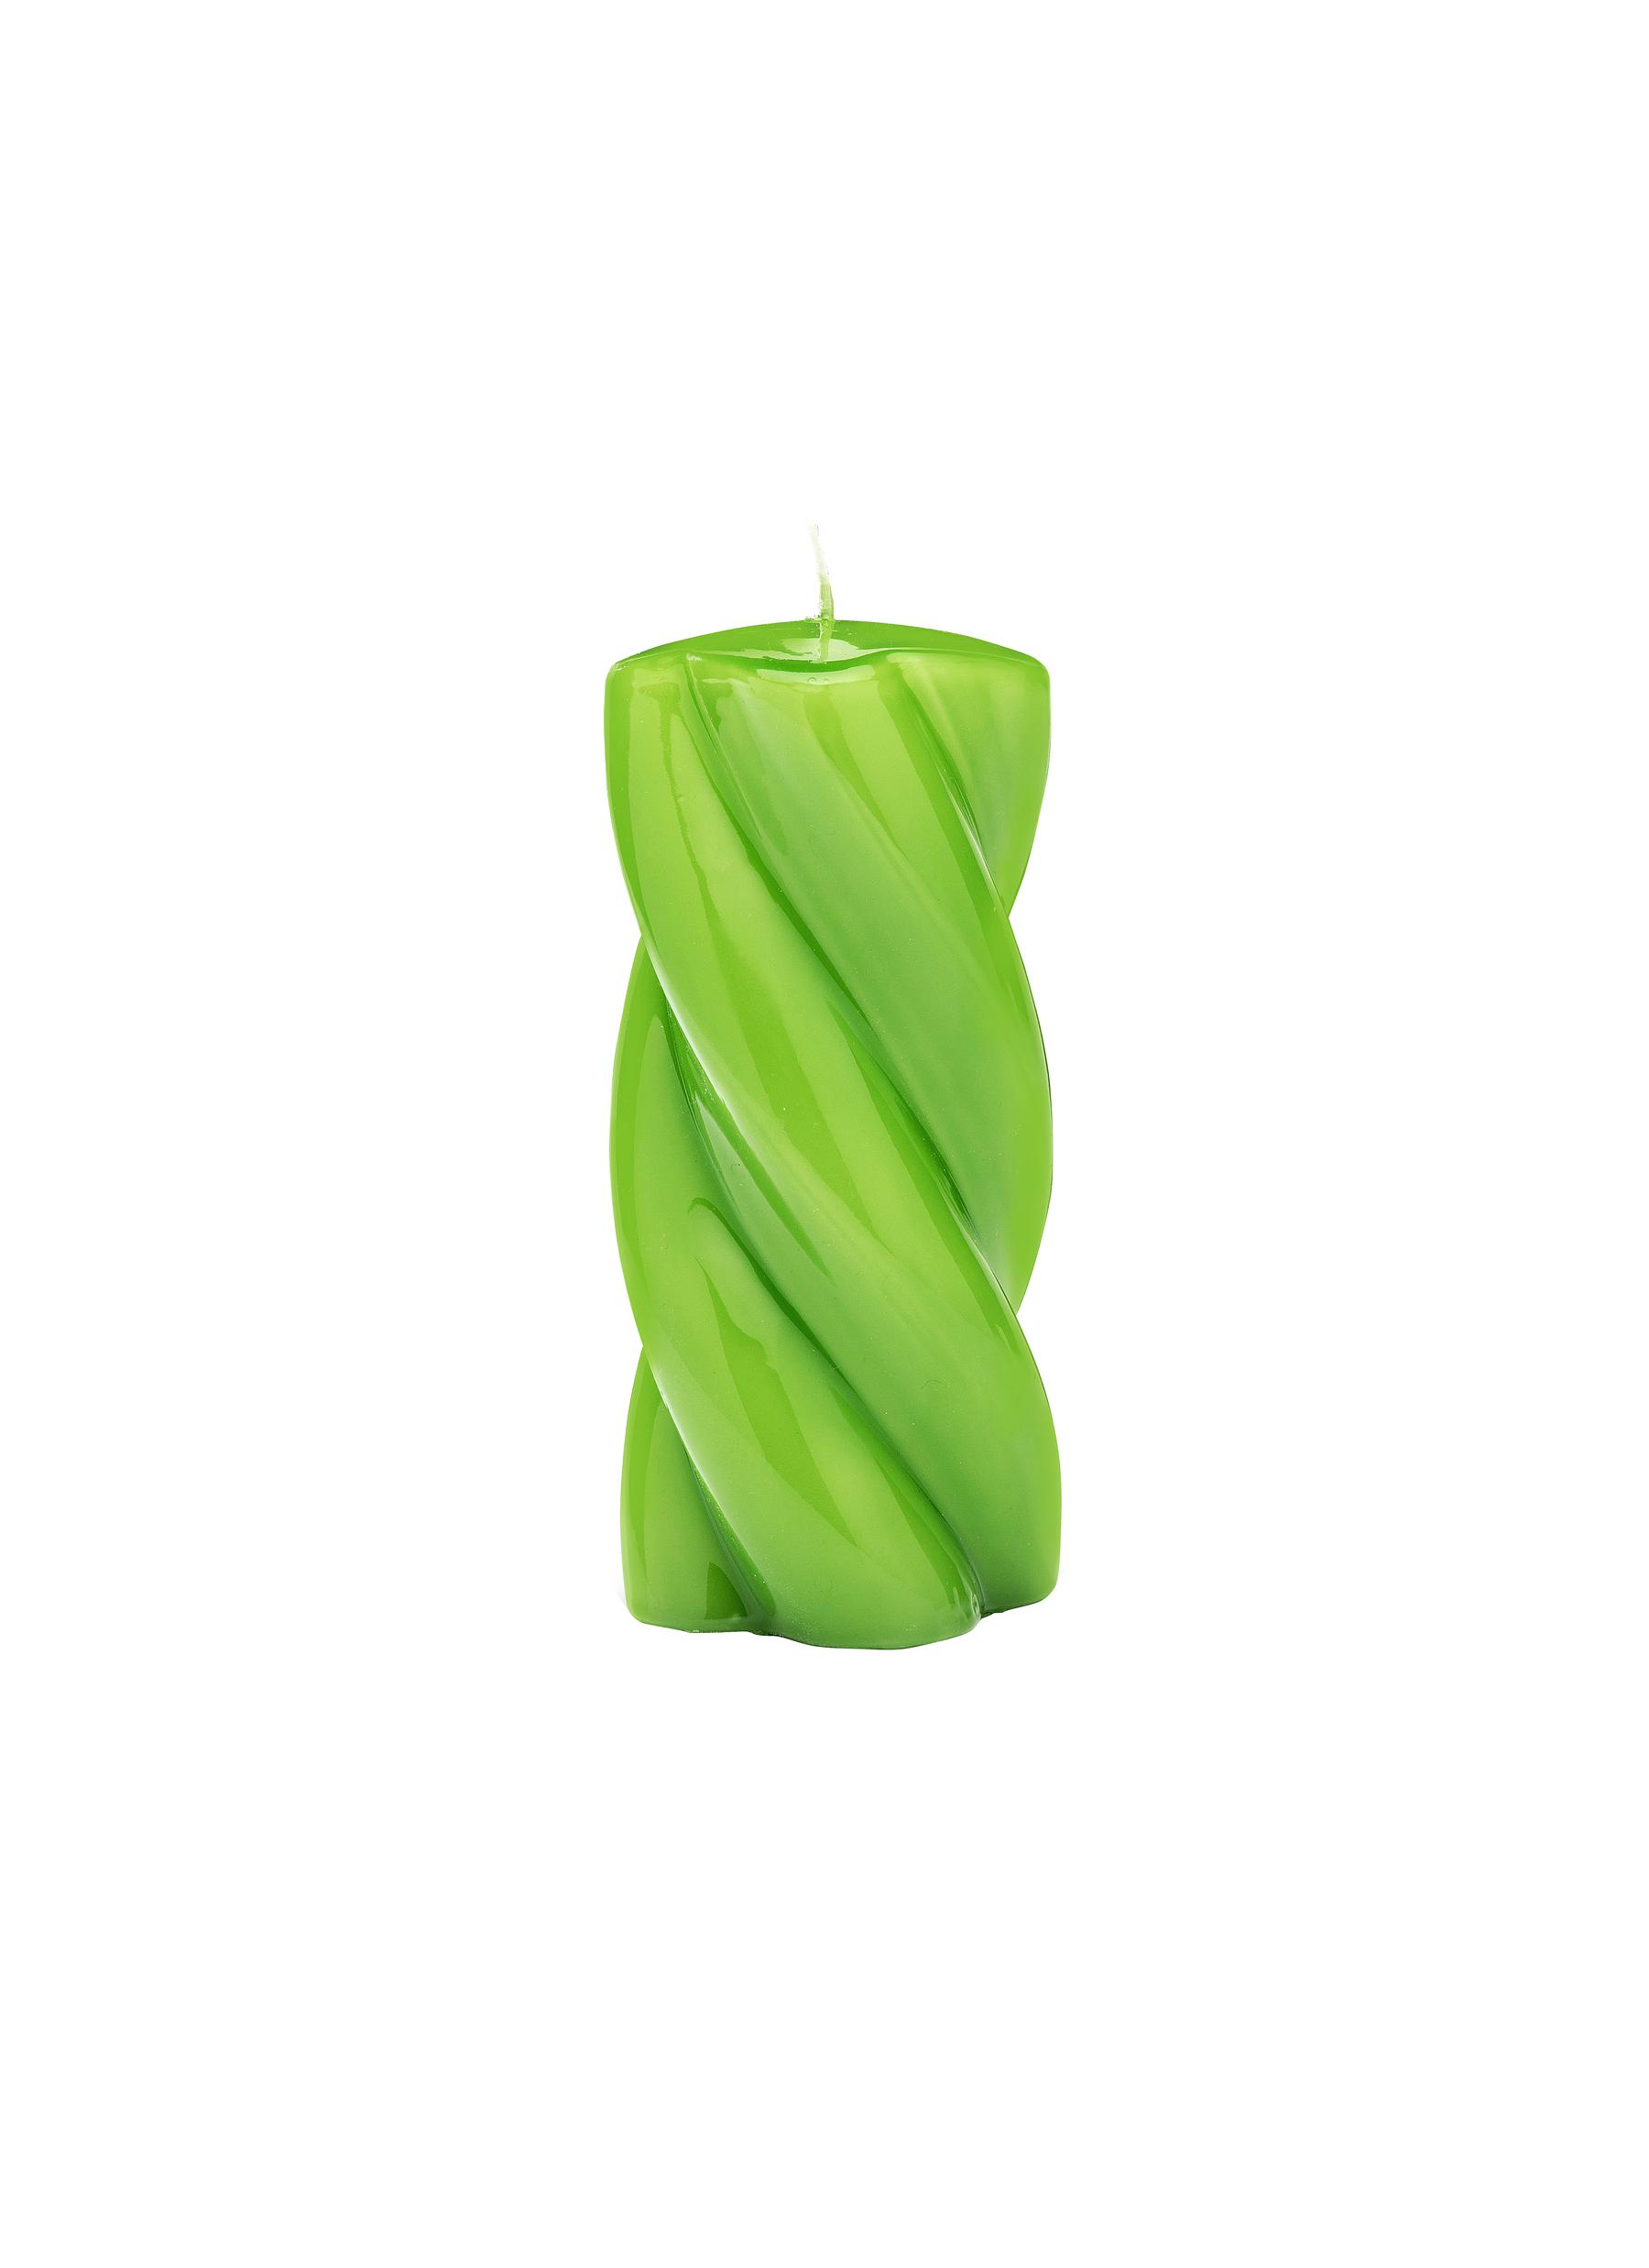 Anna + Nina Blunt Twisted Long Candle - Moss Green